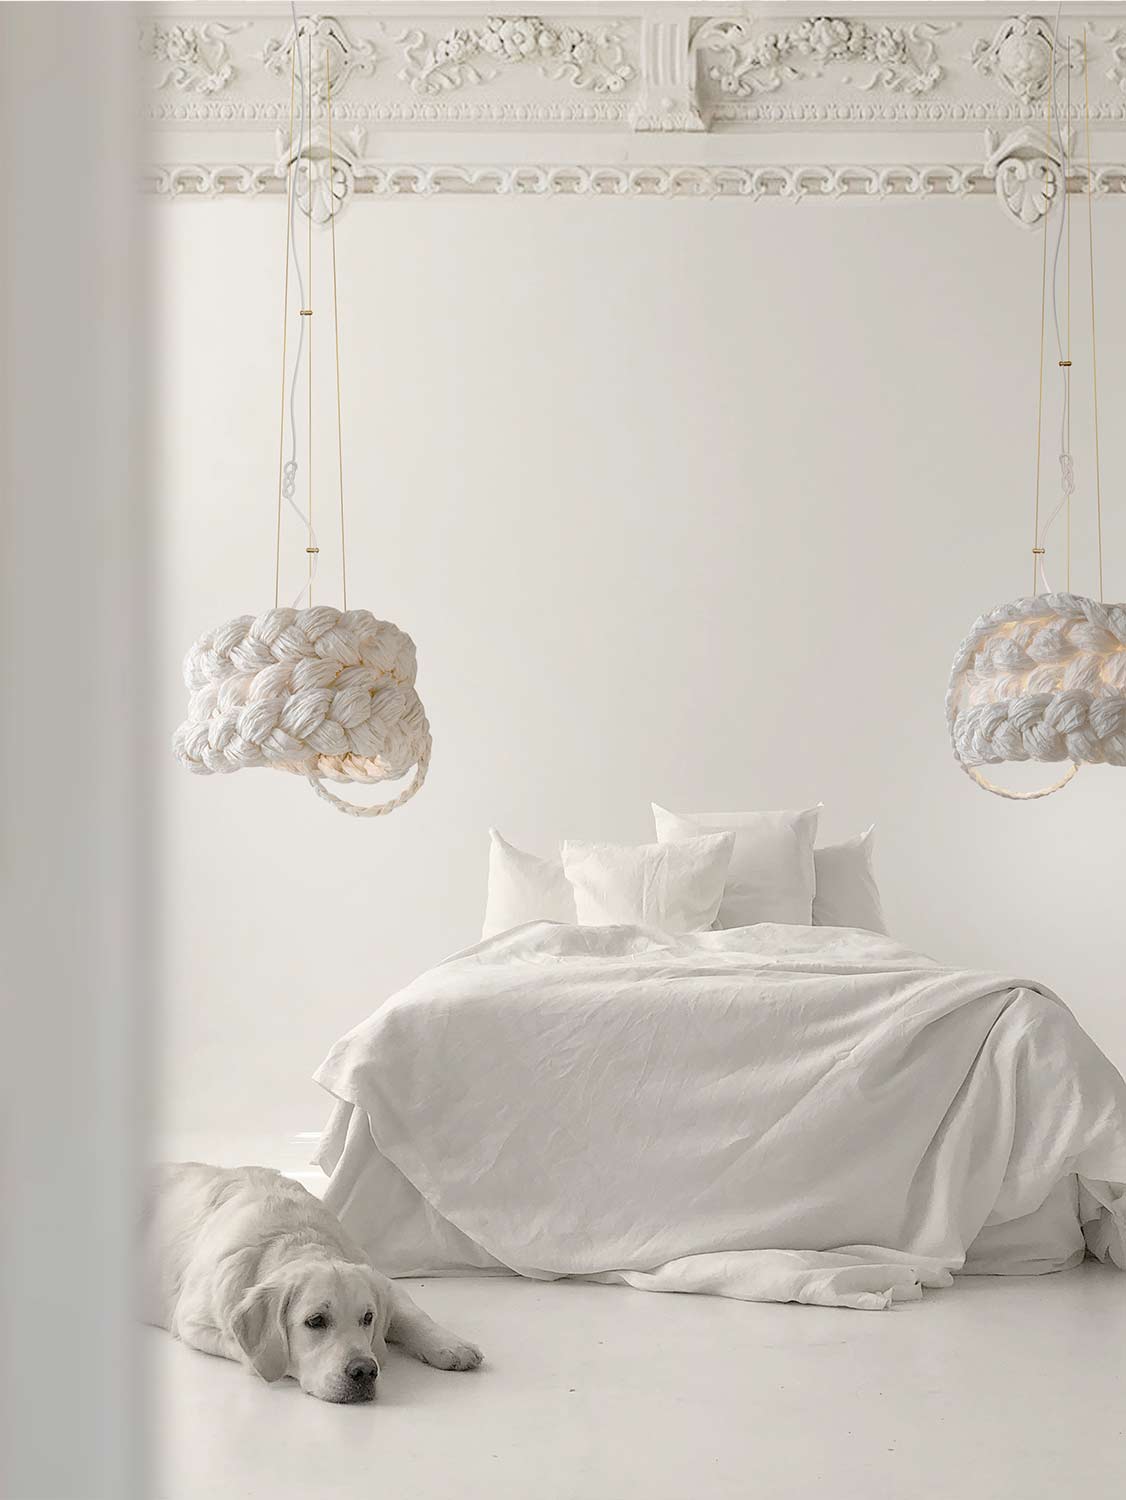 White Paper Braided Unique Handmade Pendant Lamp | Cozy Atmosphere Lighting | Contemporary Natural Lighting for Living room,  Bedroom & Lobby | Sustainable Design Lighting | baby & kids room lighting | White interior | mammalampa The Bride suspension lamp S